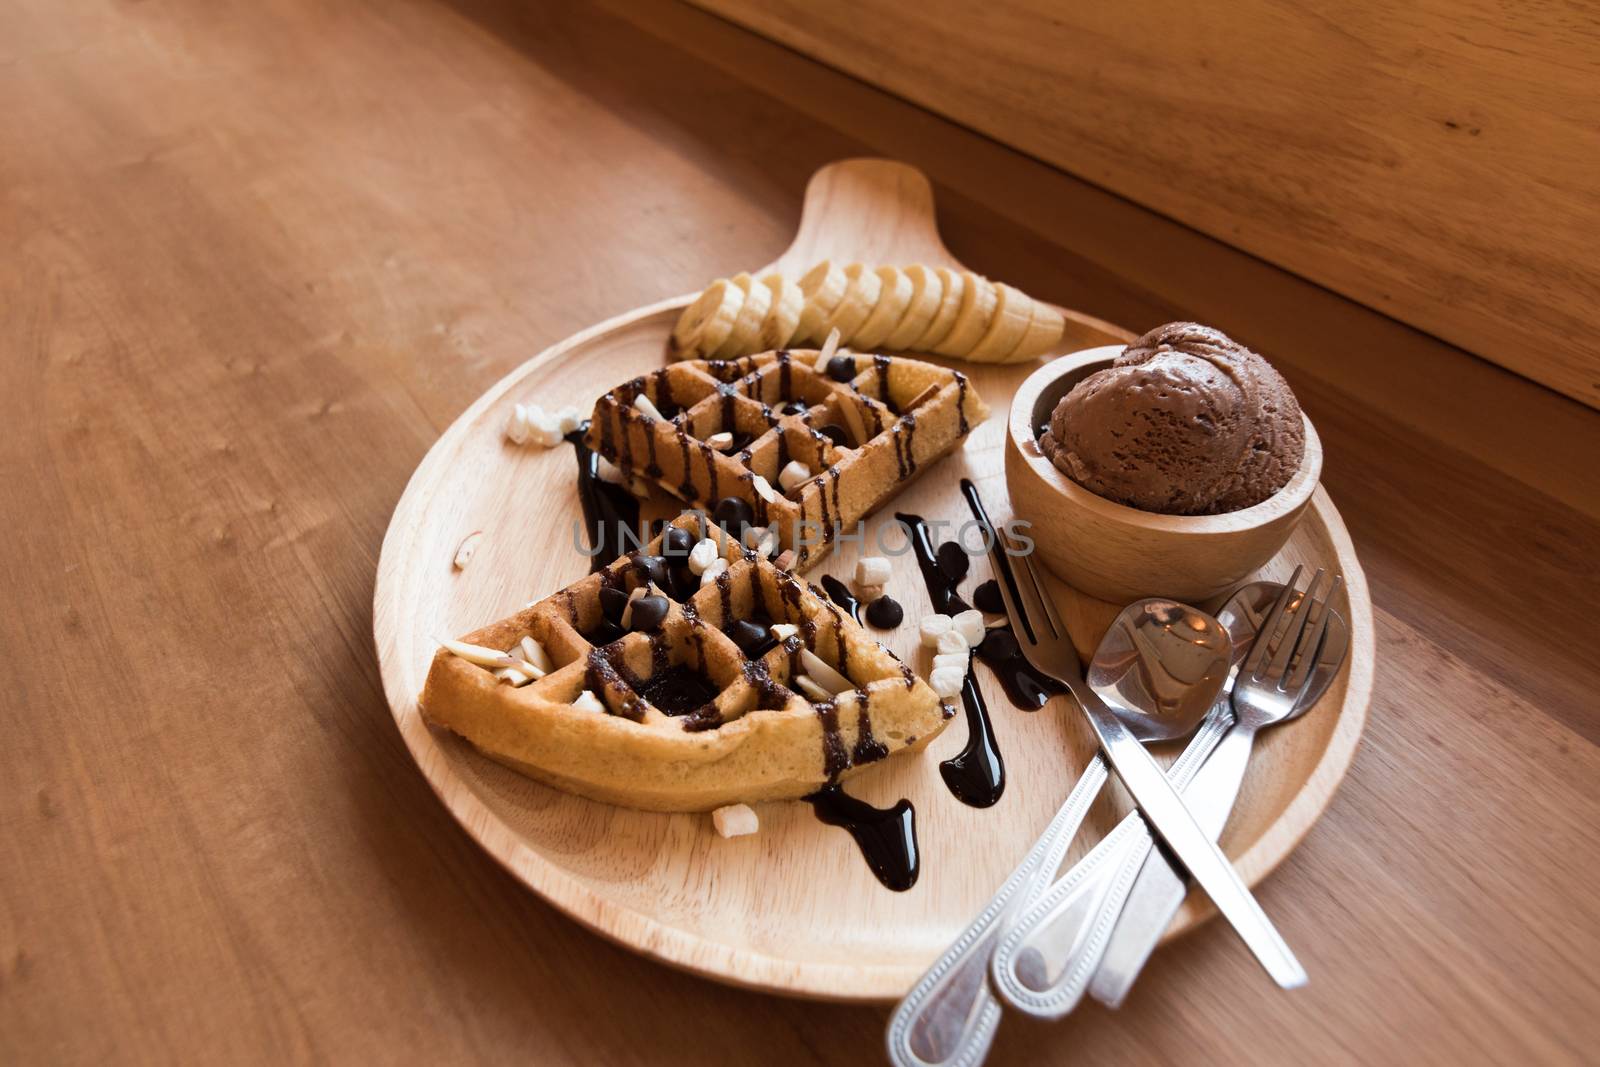 delicious sweet dessert : homemade waffle with chocolate sauce , by dfrsce